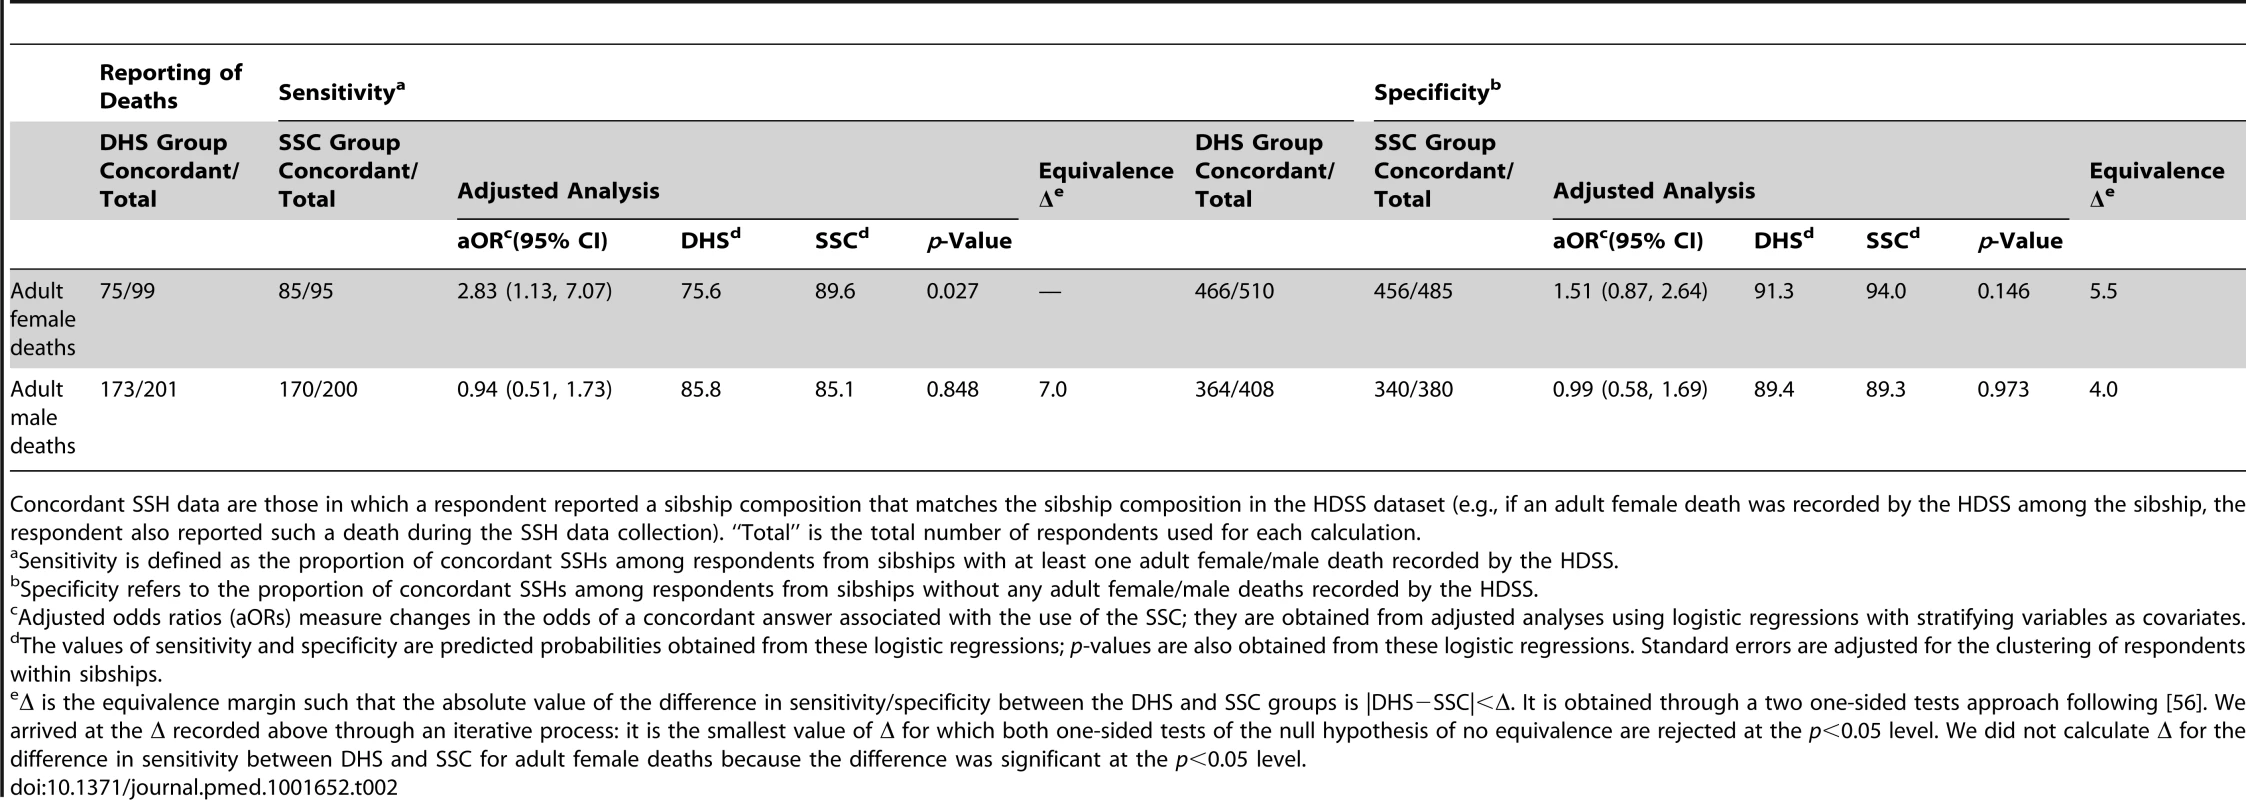 Specificity and sensitivity of SSH data, by study group.